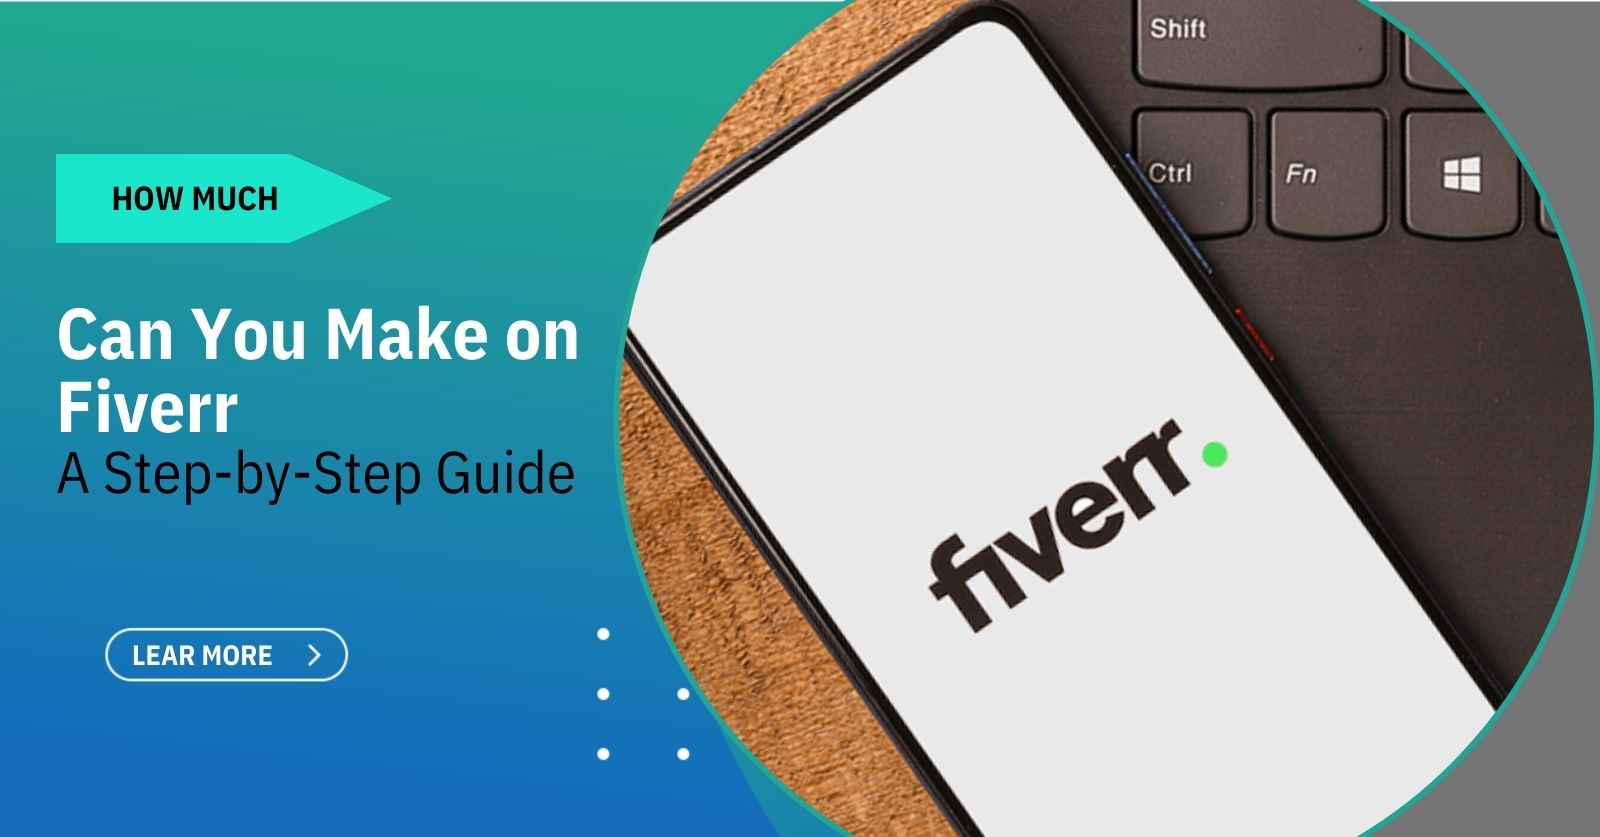 How Much Can You Make on Fiverr?